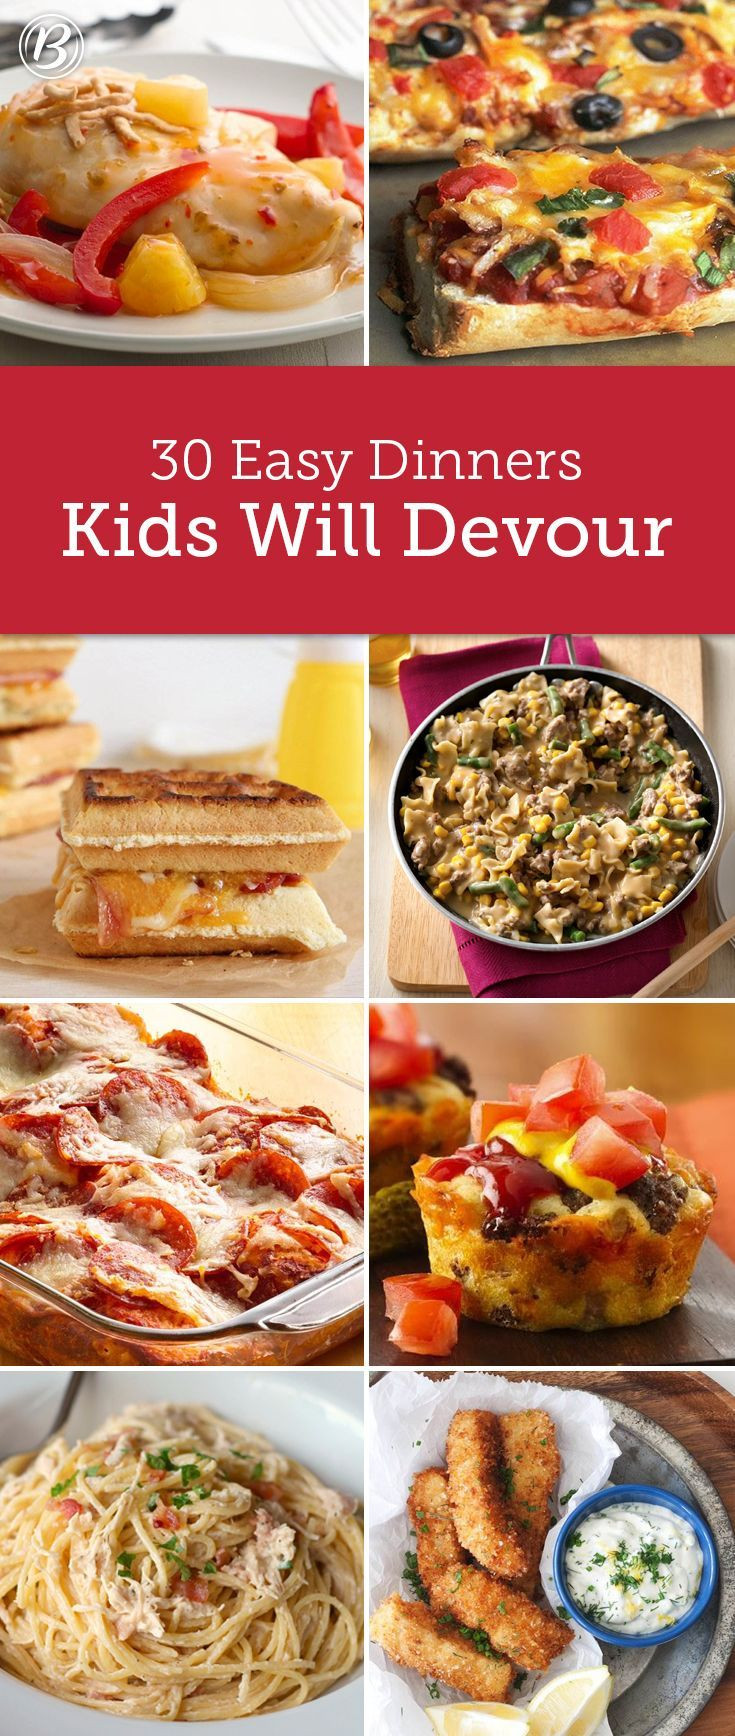 Healthy Family Dinners For Picky Eaters
 25 Best Ideas about Picky Eater Meals on Pinterest